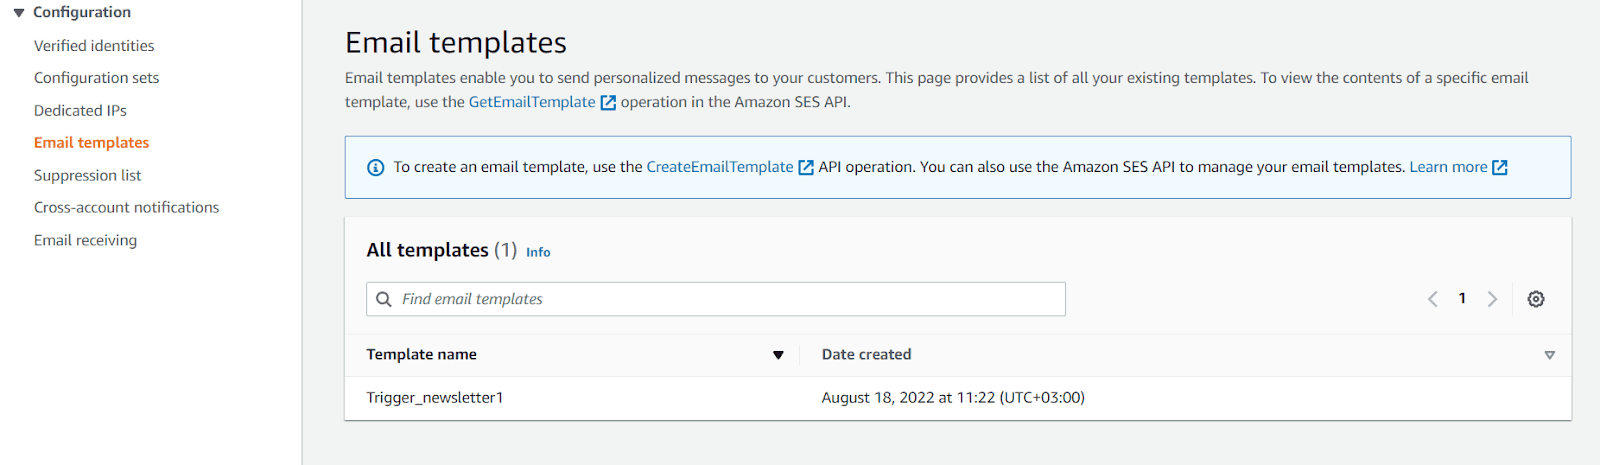 Amazon SES _ Exporting Your Email